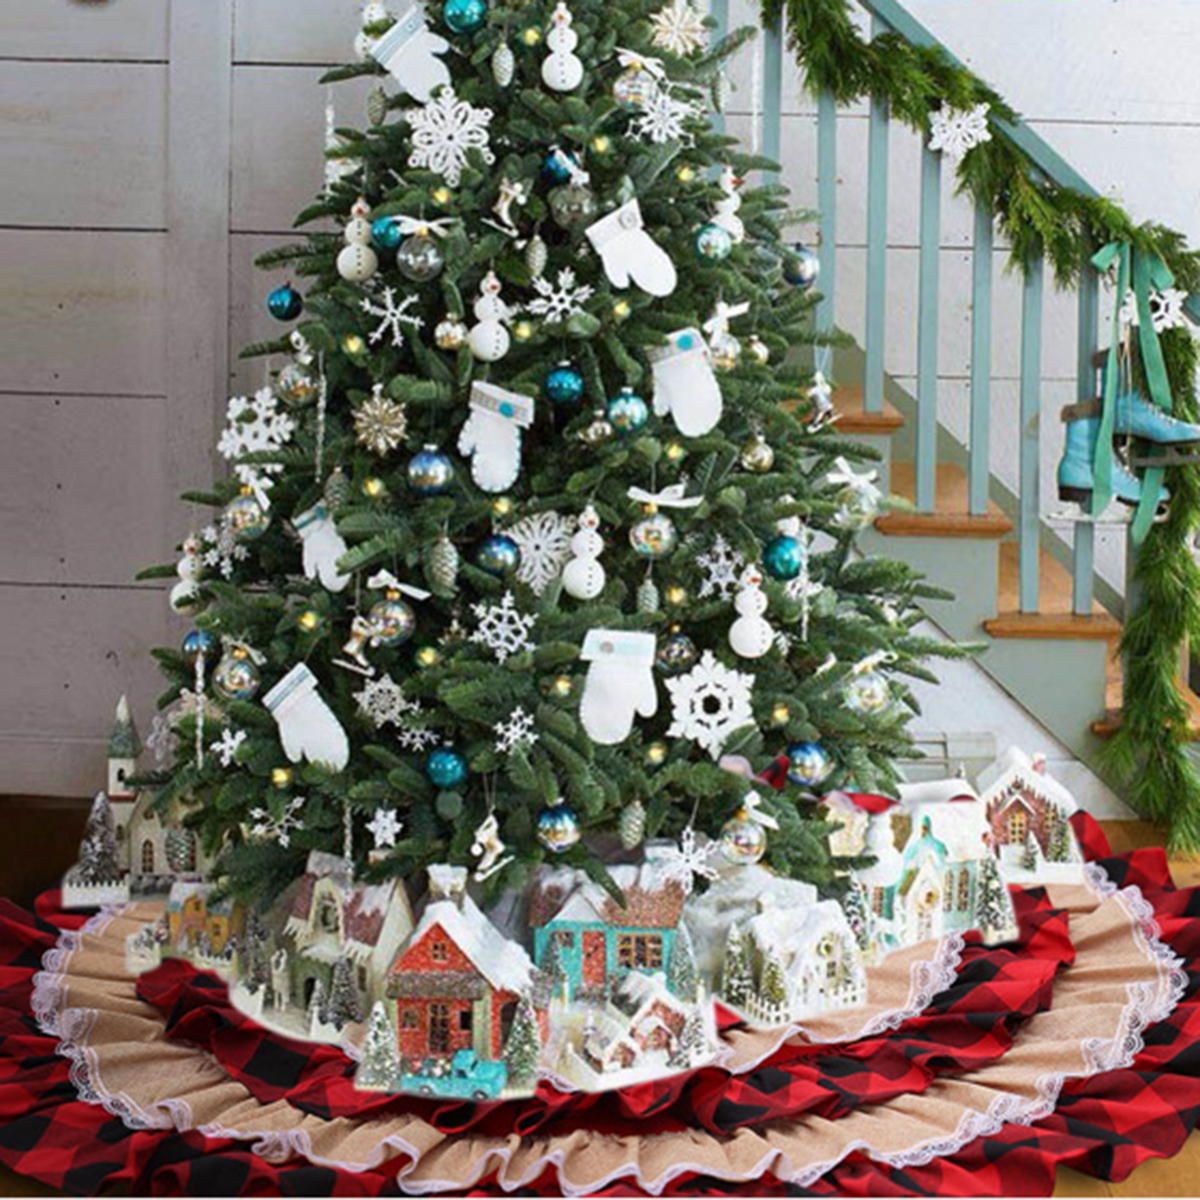 2020-Christmas-Tree-Skirts-Red-Cake-Plaid-Lace-Carpet-Round-Linen-Apron-New-Year-Blanket-Home-Partie-1770964-10